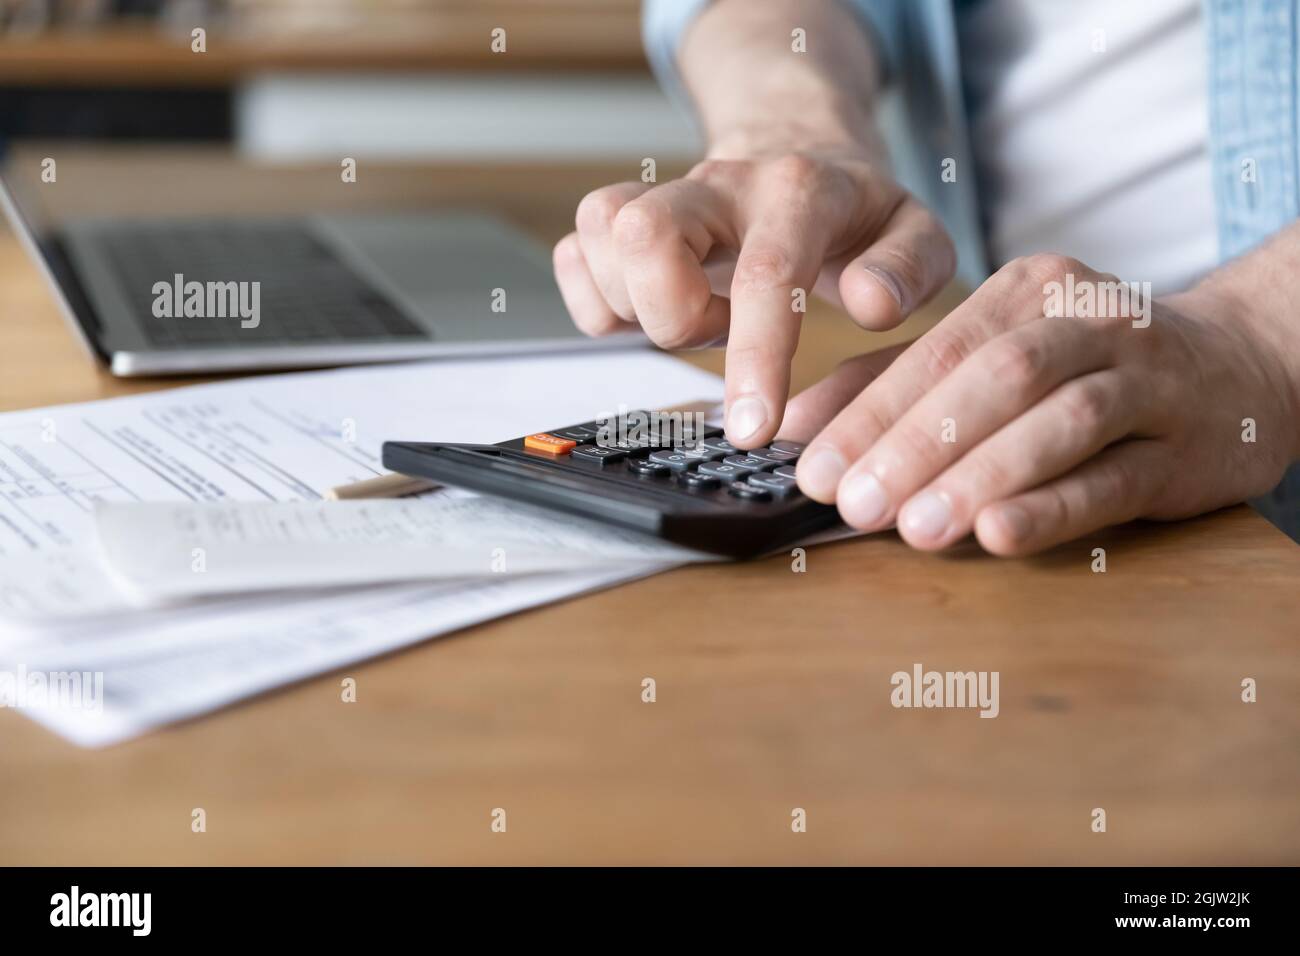 Man costs personal incomes and expenses using calculator close up Stock Photo